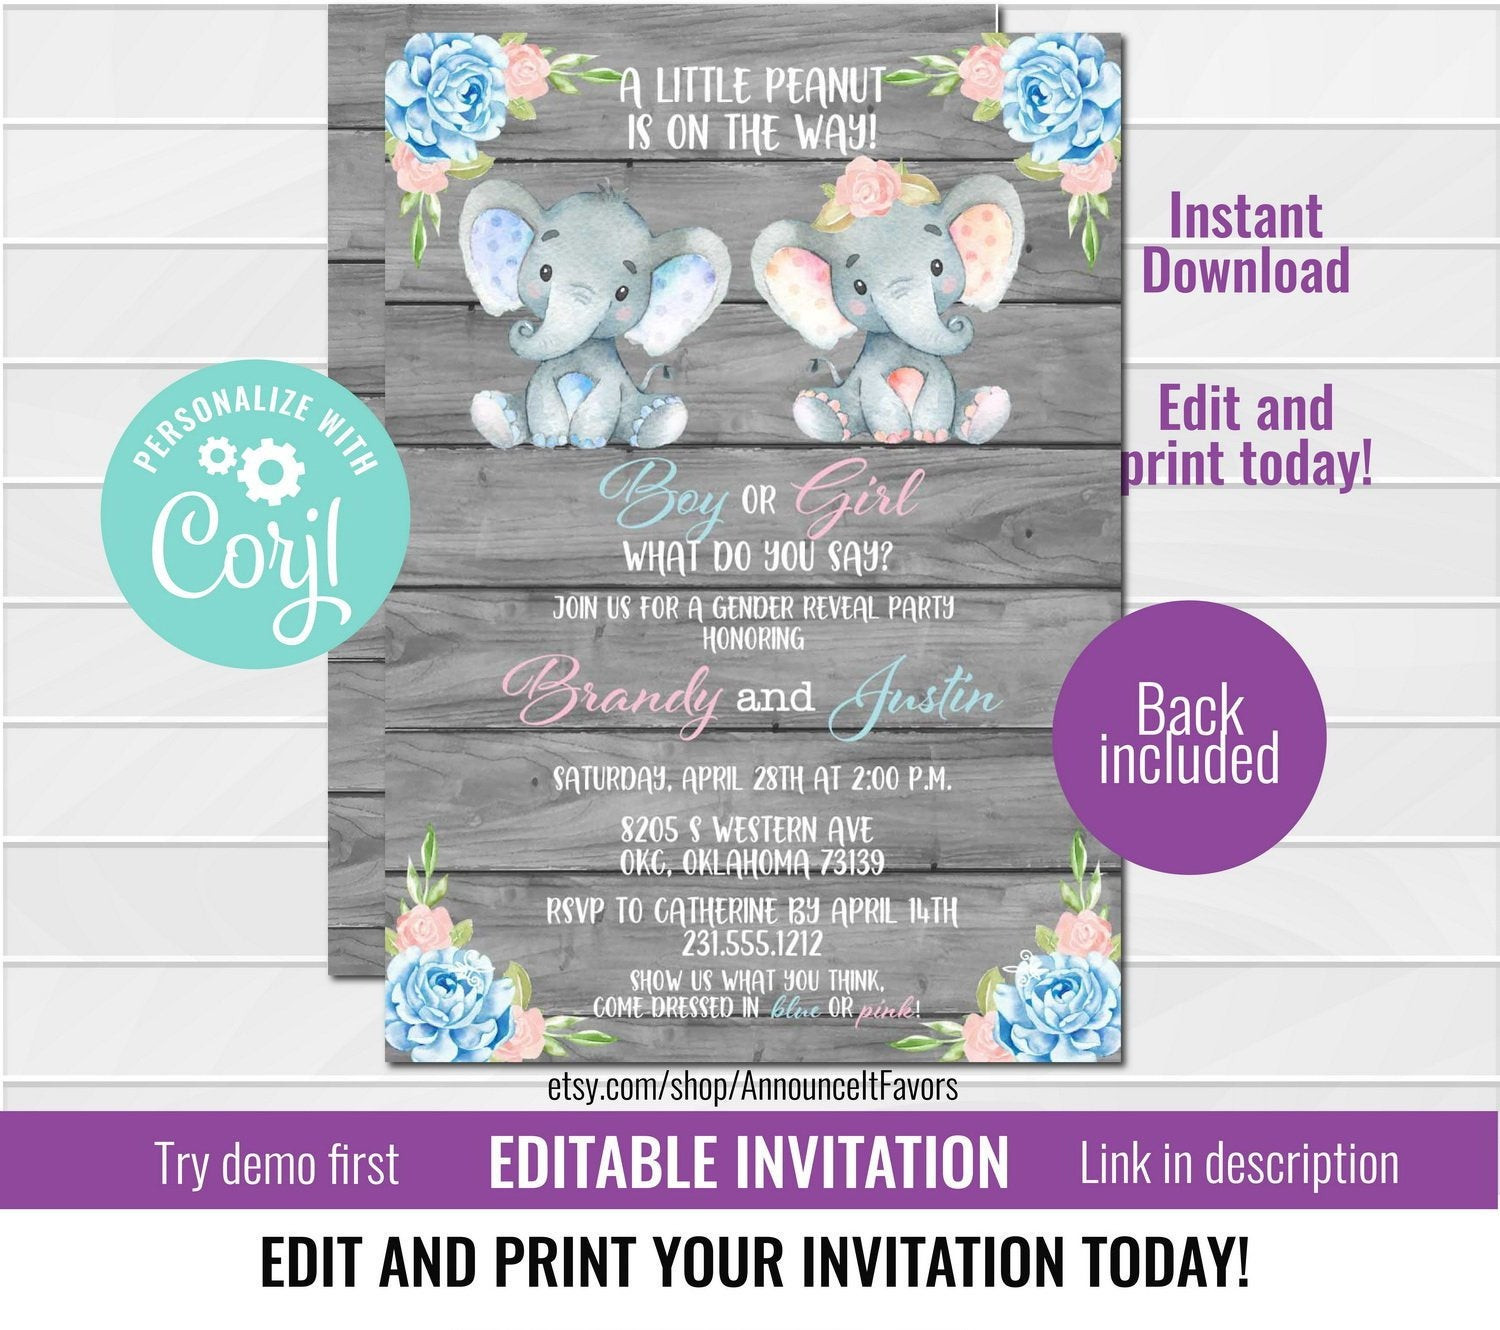 Elephant Baby Shower Invitations Party City
 Elephant Gender Reveal Invitation Printable Floral Pink or